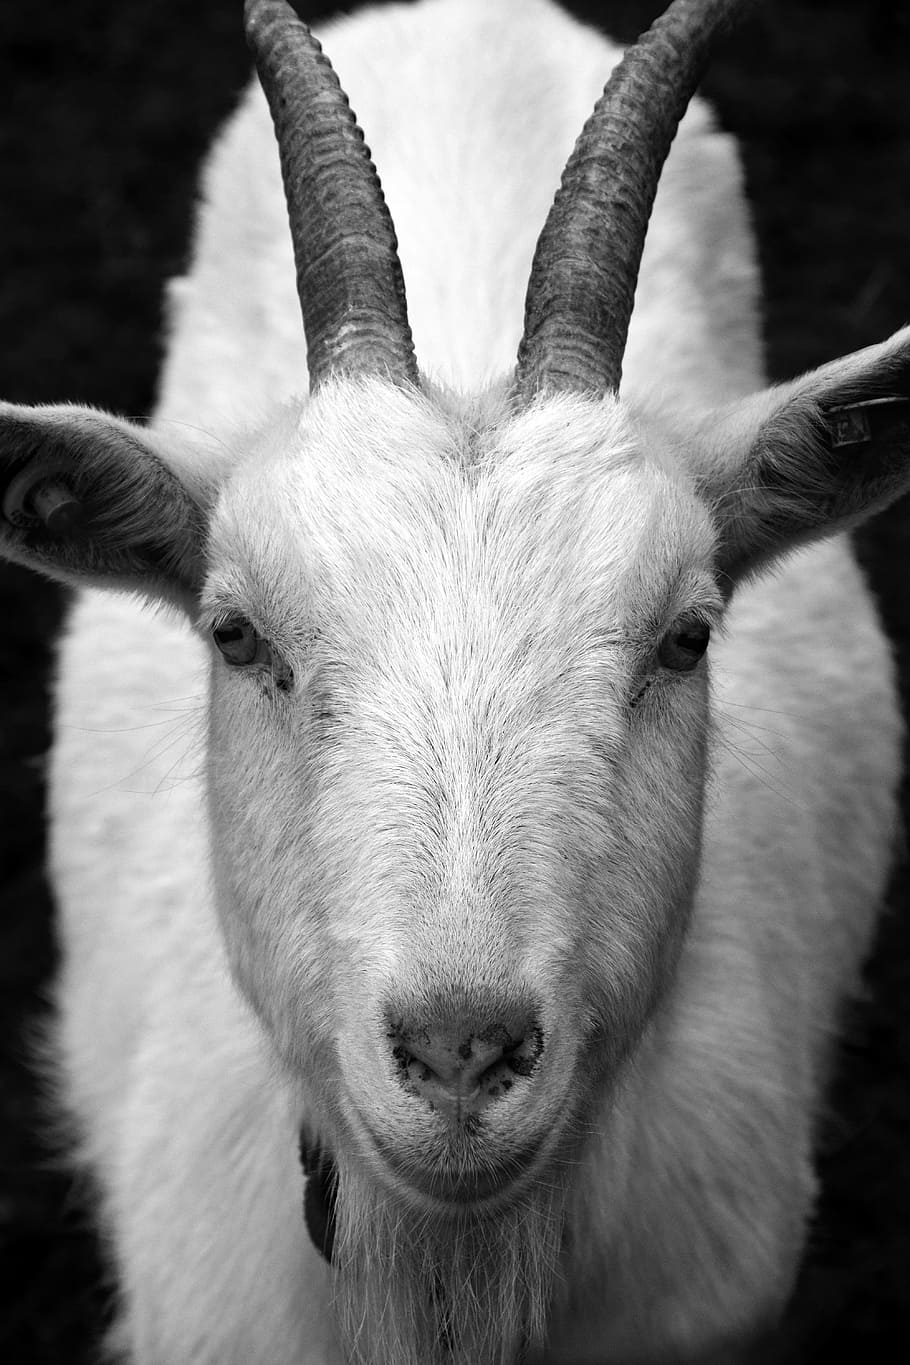 goat, billy goat, horns, head, close, frontal, view, goatee, black white, curious